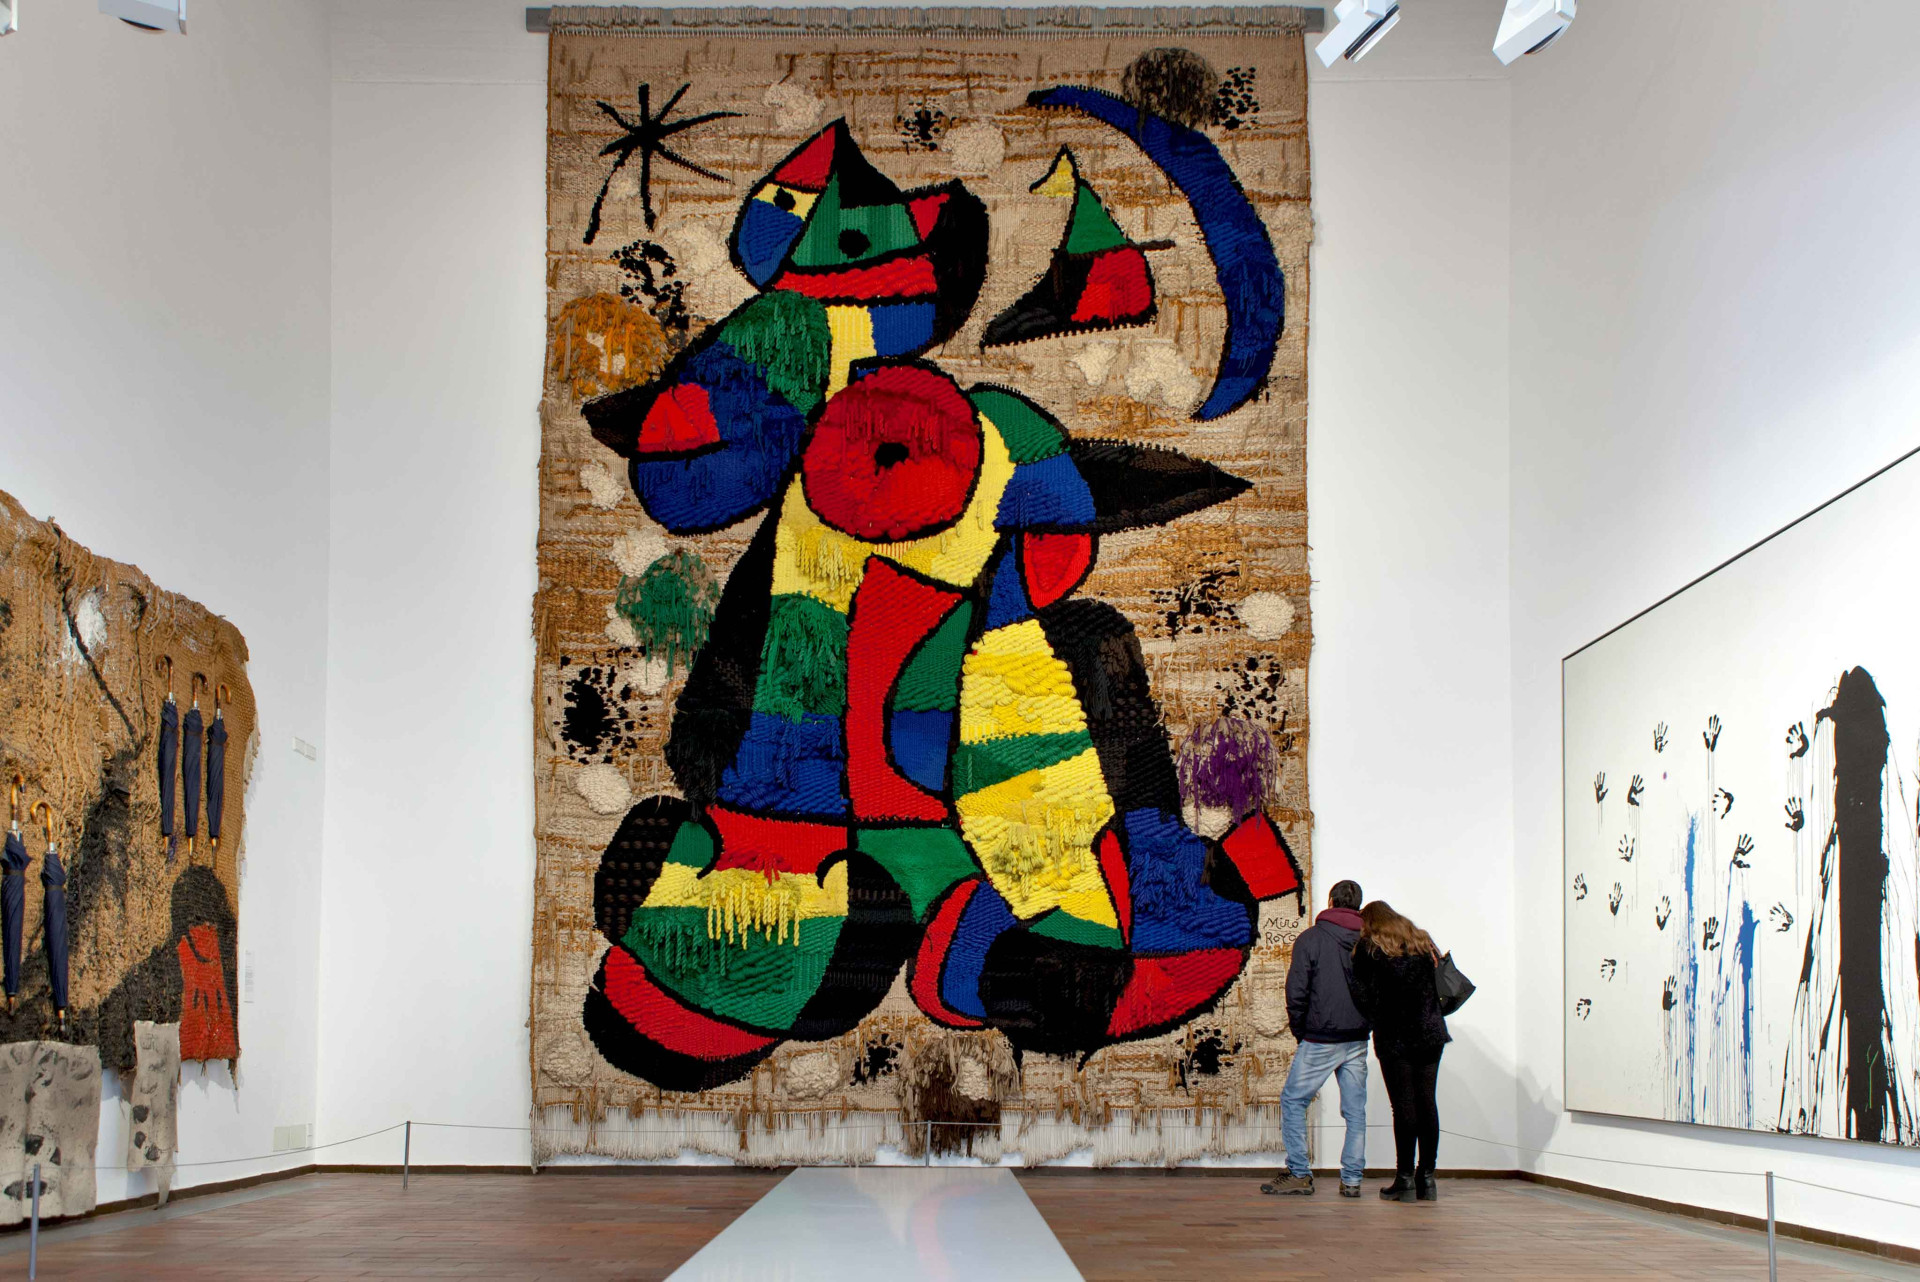 Joan Miró's Masterpieces and Private Chef's Dinner